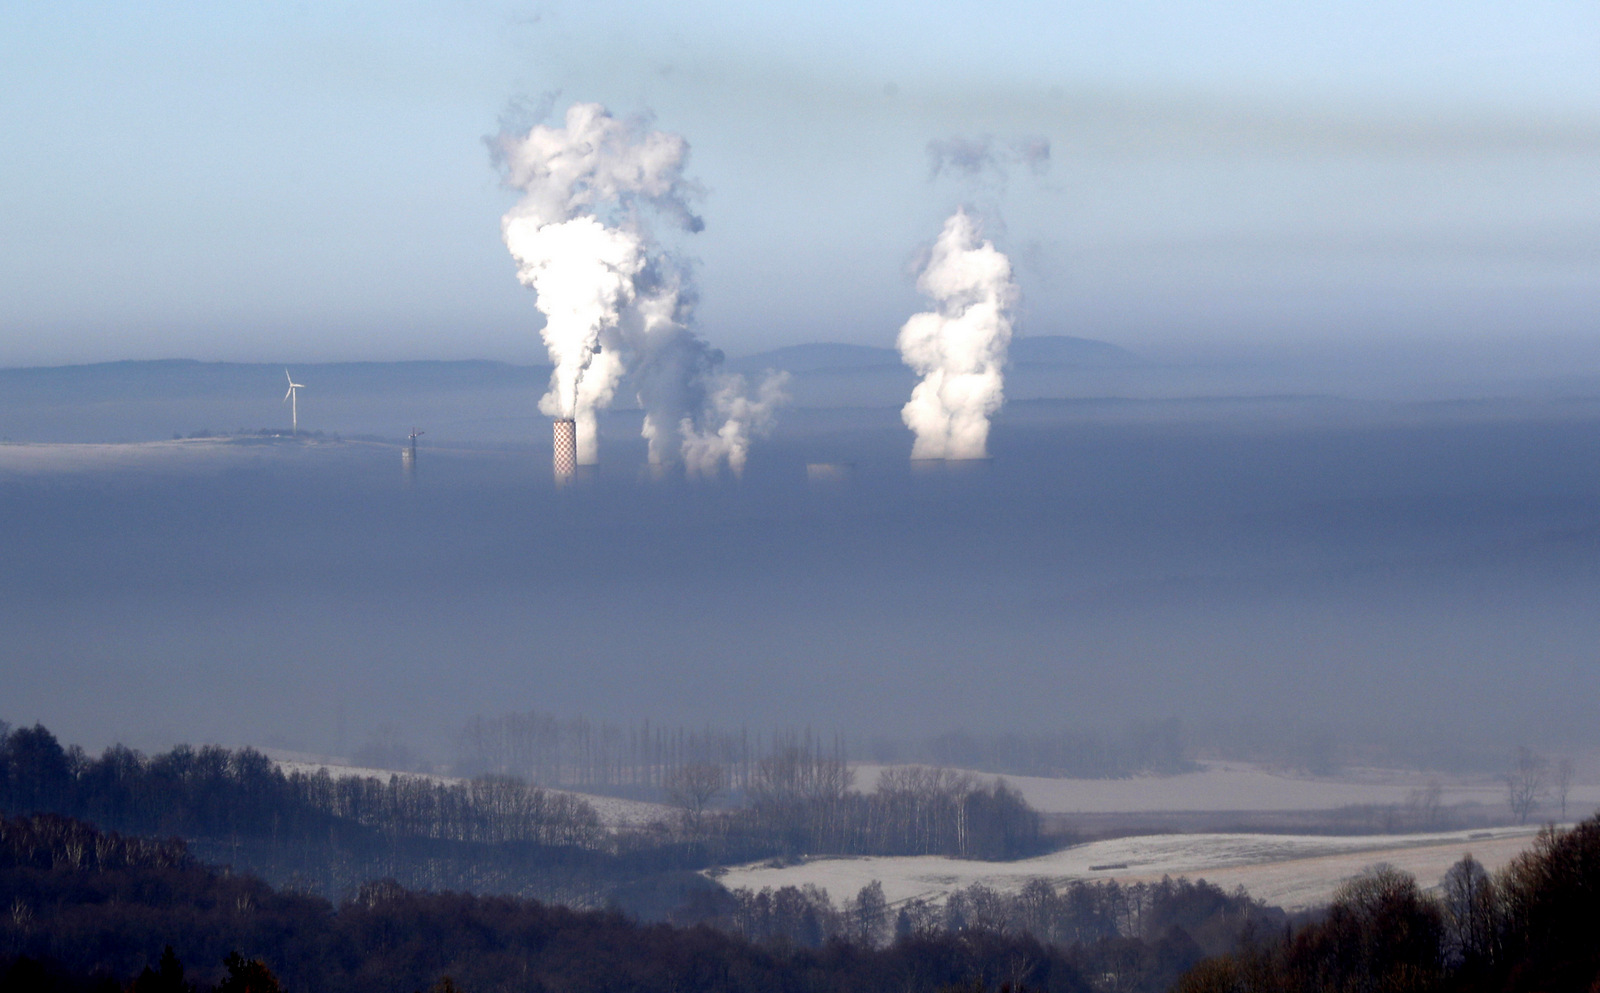 Smoke rises from chimneys of the coal-fired power plant in Bogatynia, Poland. The picture was taken from a hill near the town of Frydlant, Czech Republic, Feb. 14, 2017, as smog across coal-addicted Poland hit crisis levels recently. (AP/Petr David Josek)